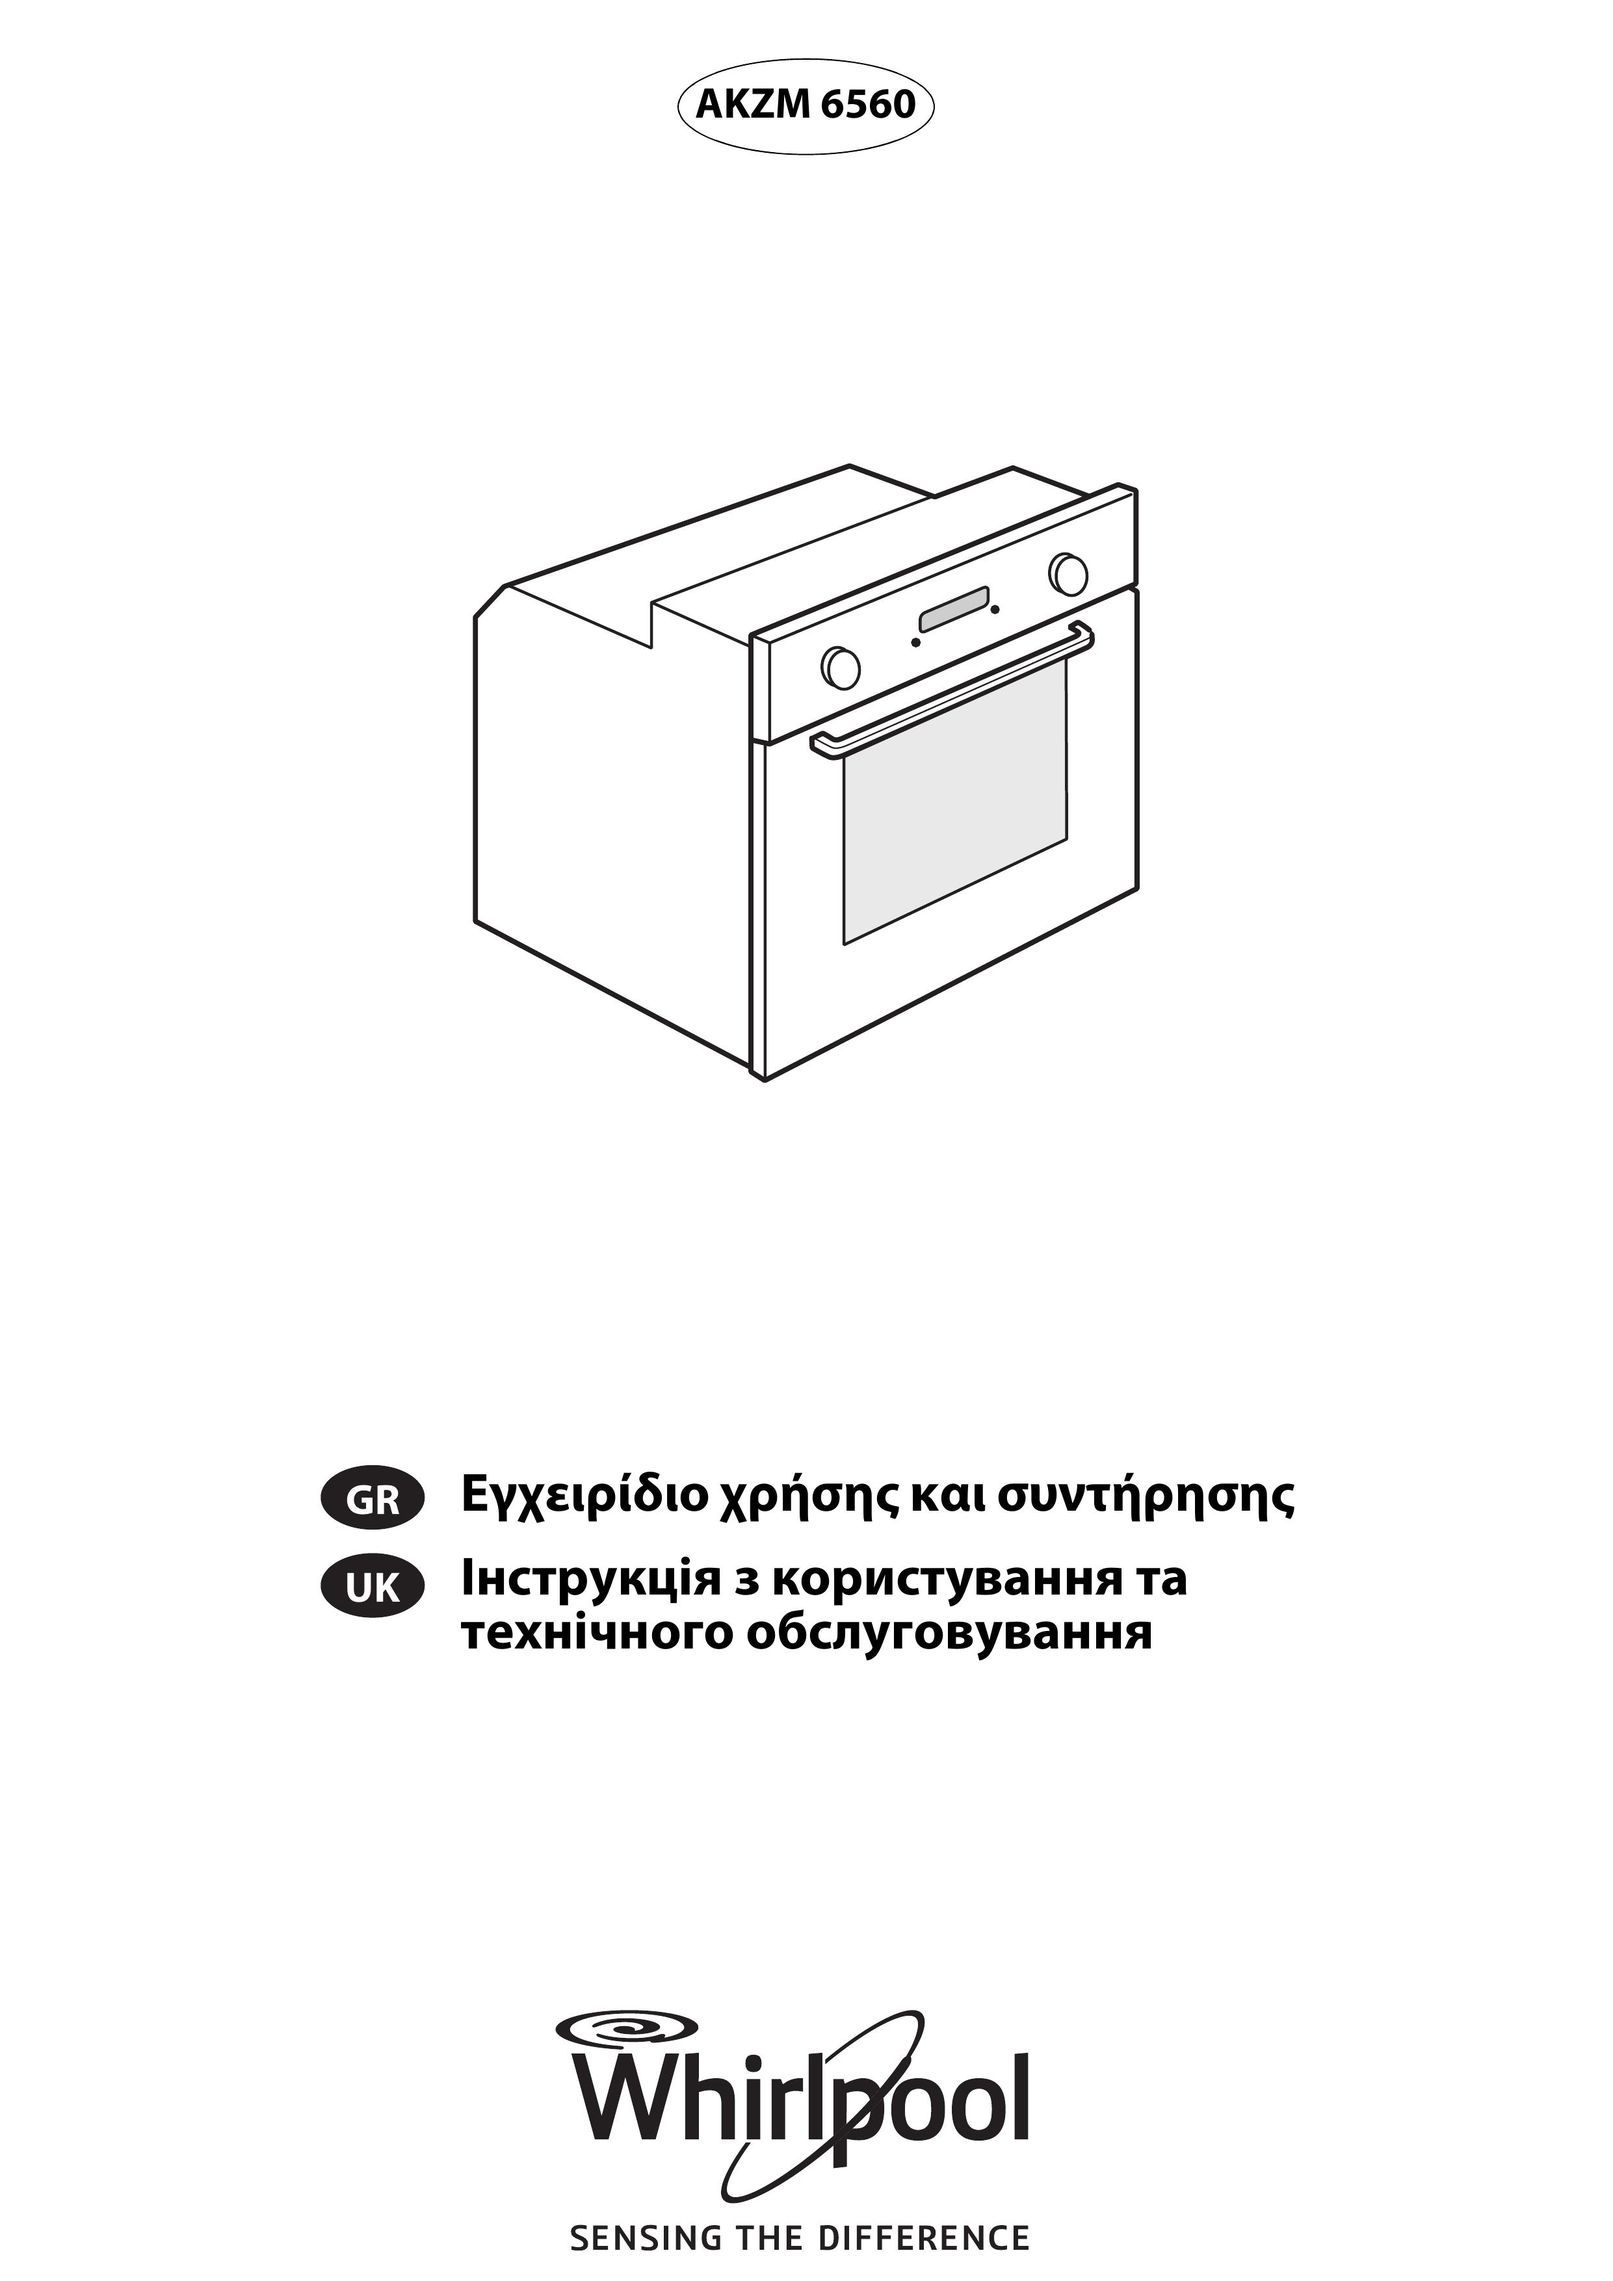 Whirlpool AKZM 6560 Microwave Oven User Manual